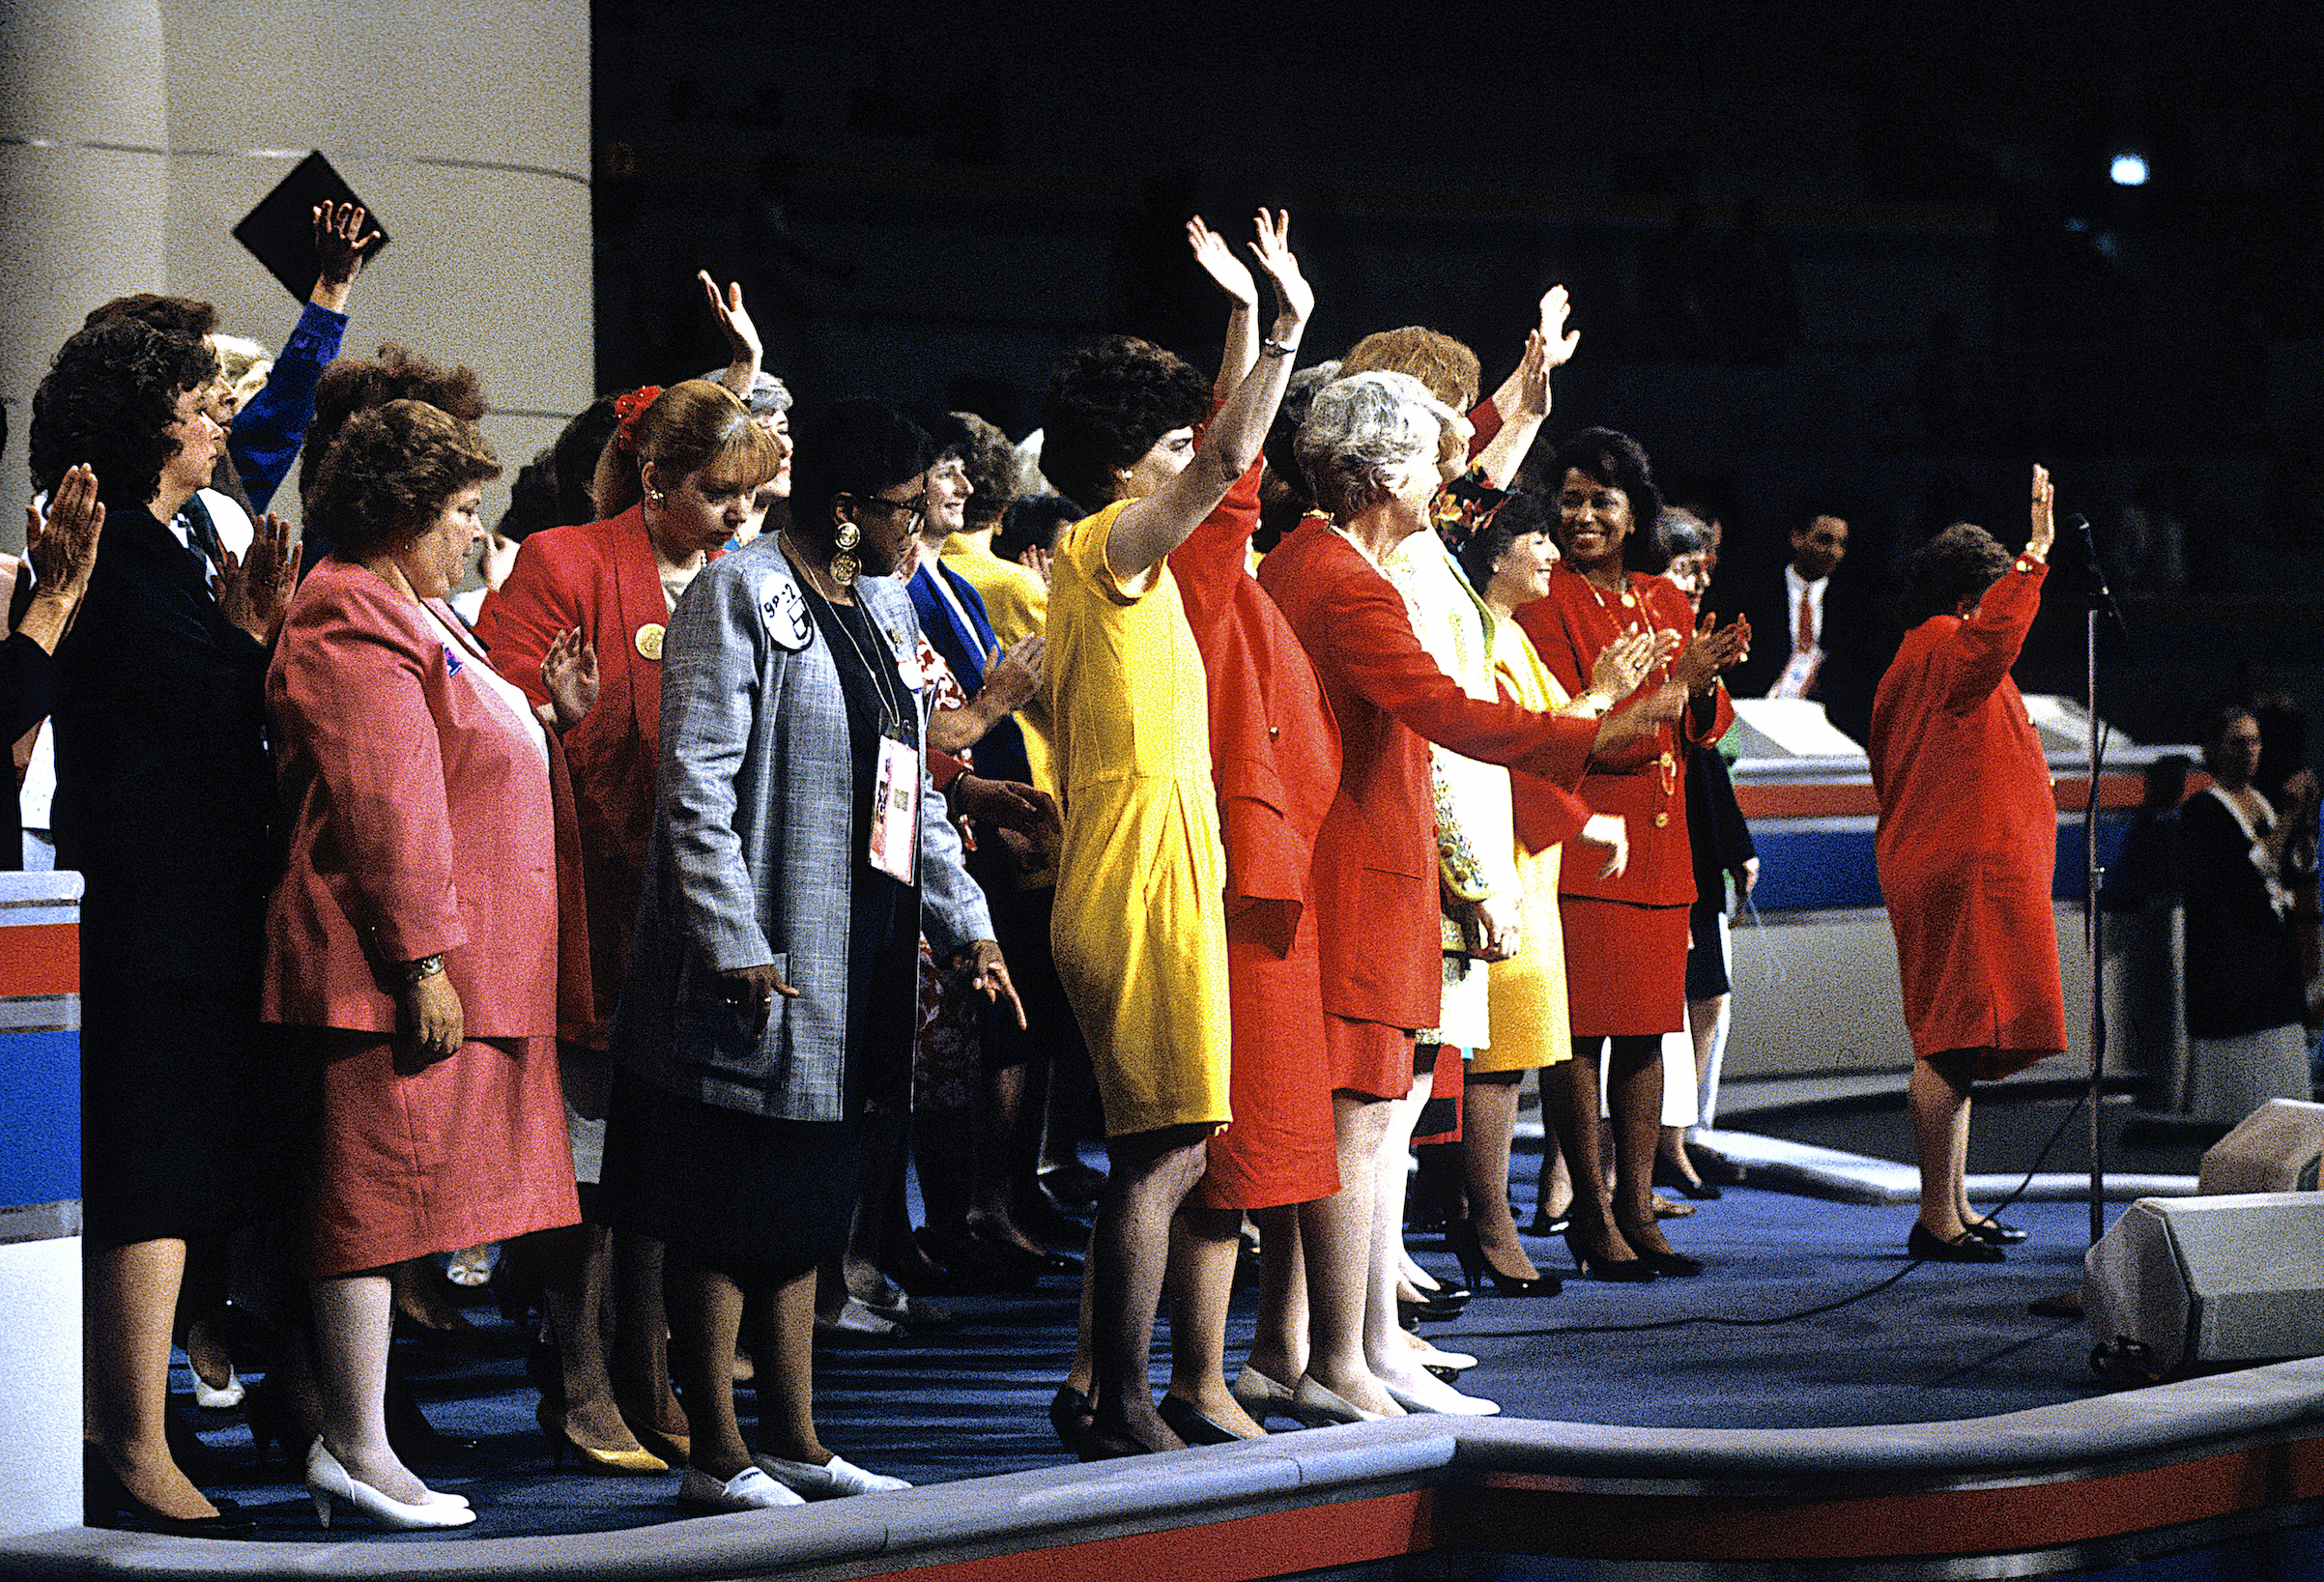 Barbara Jordan, Barbara A. Mikulski, Carol Moseley Braun, Dianne Feinstein, Barbara Boxer, Maxine Waters, and Geraldine Ferraro, among others, on stage at the beginning of the Democratic National Convention in July of 1992. (Mark Reinstein—Corbis/Getty Images)